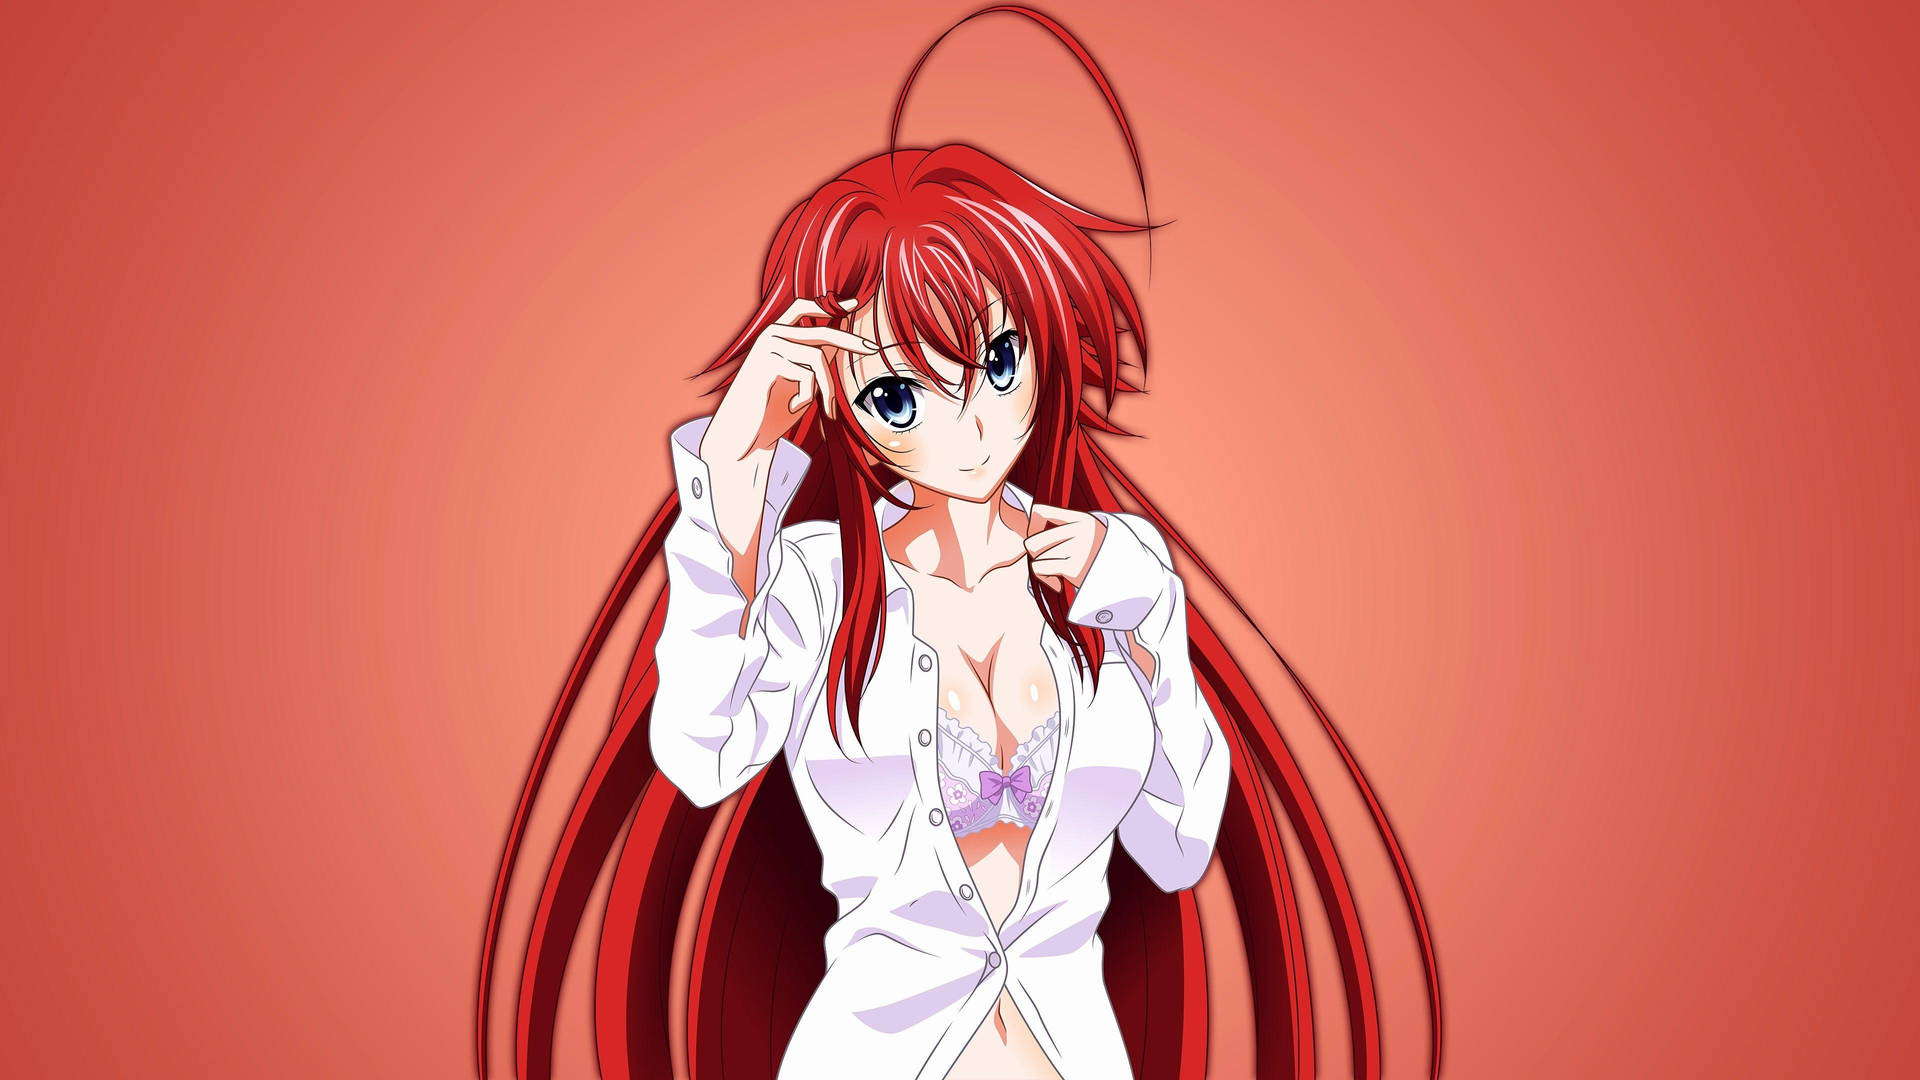 Simple Rias Highschool Dxd Background